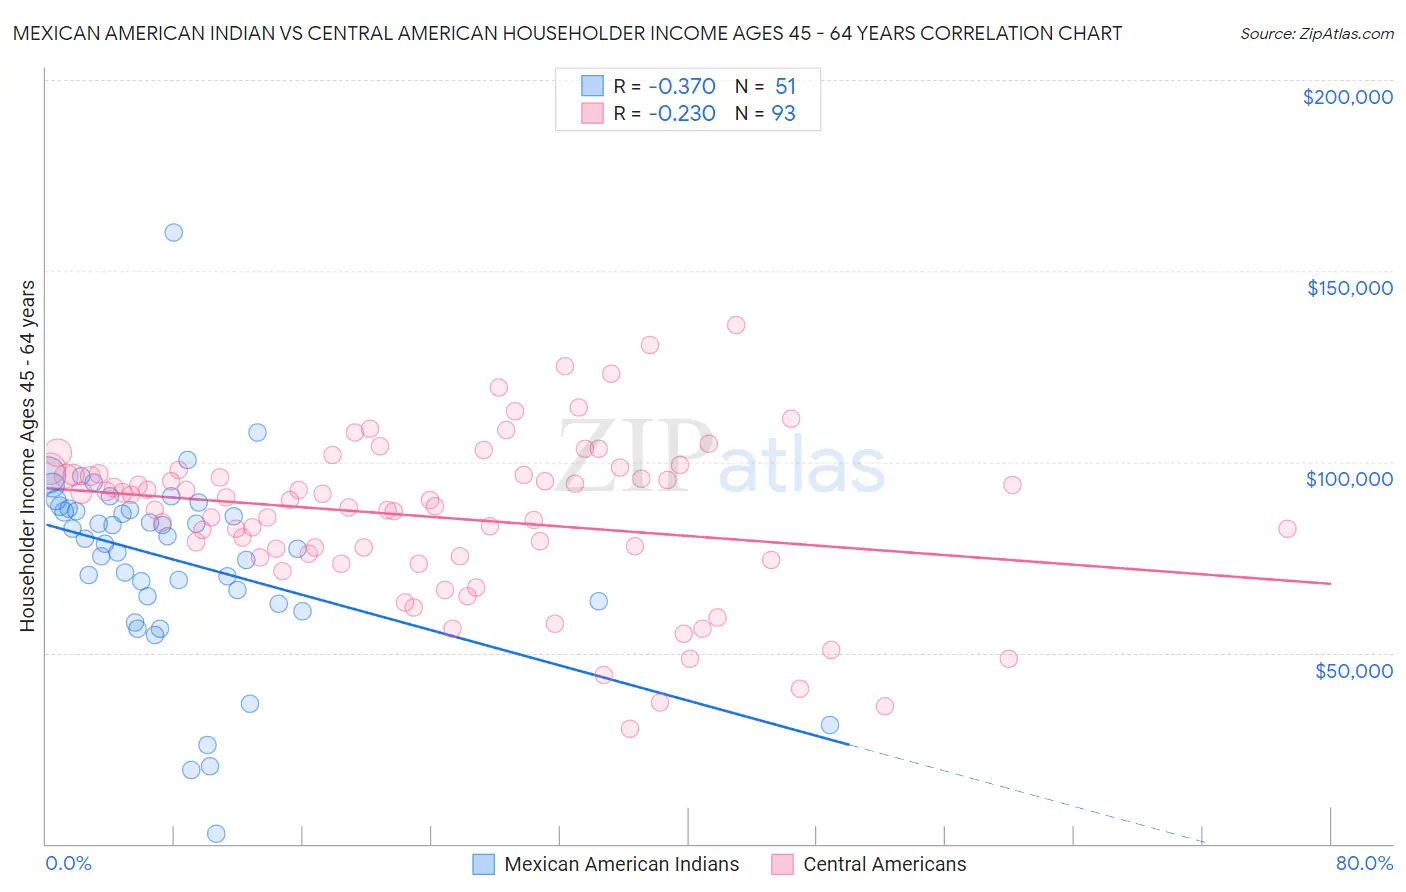 Mexican American Indian vs Central American Householder Income Ages 45 - 64 years